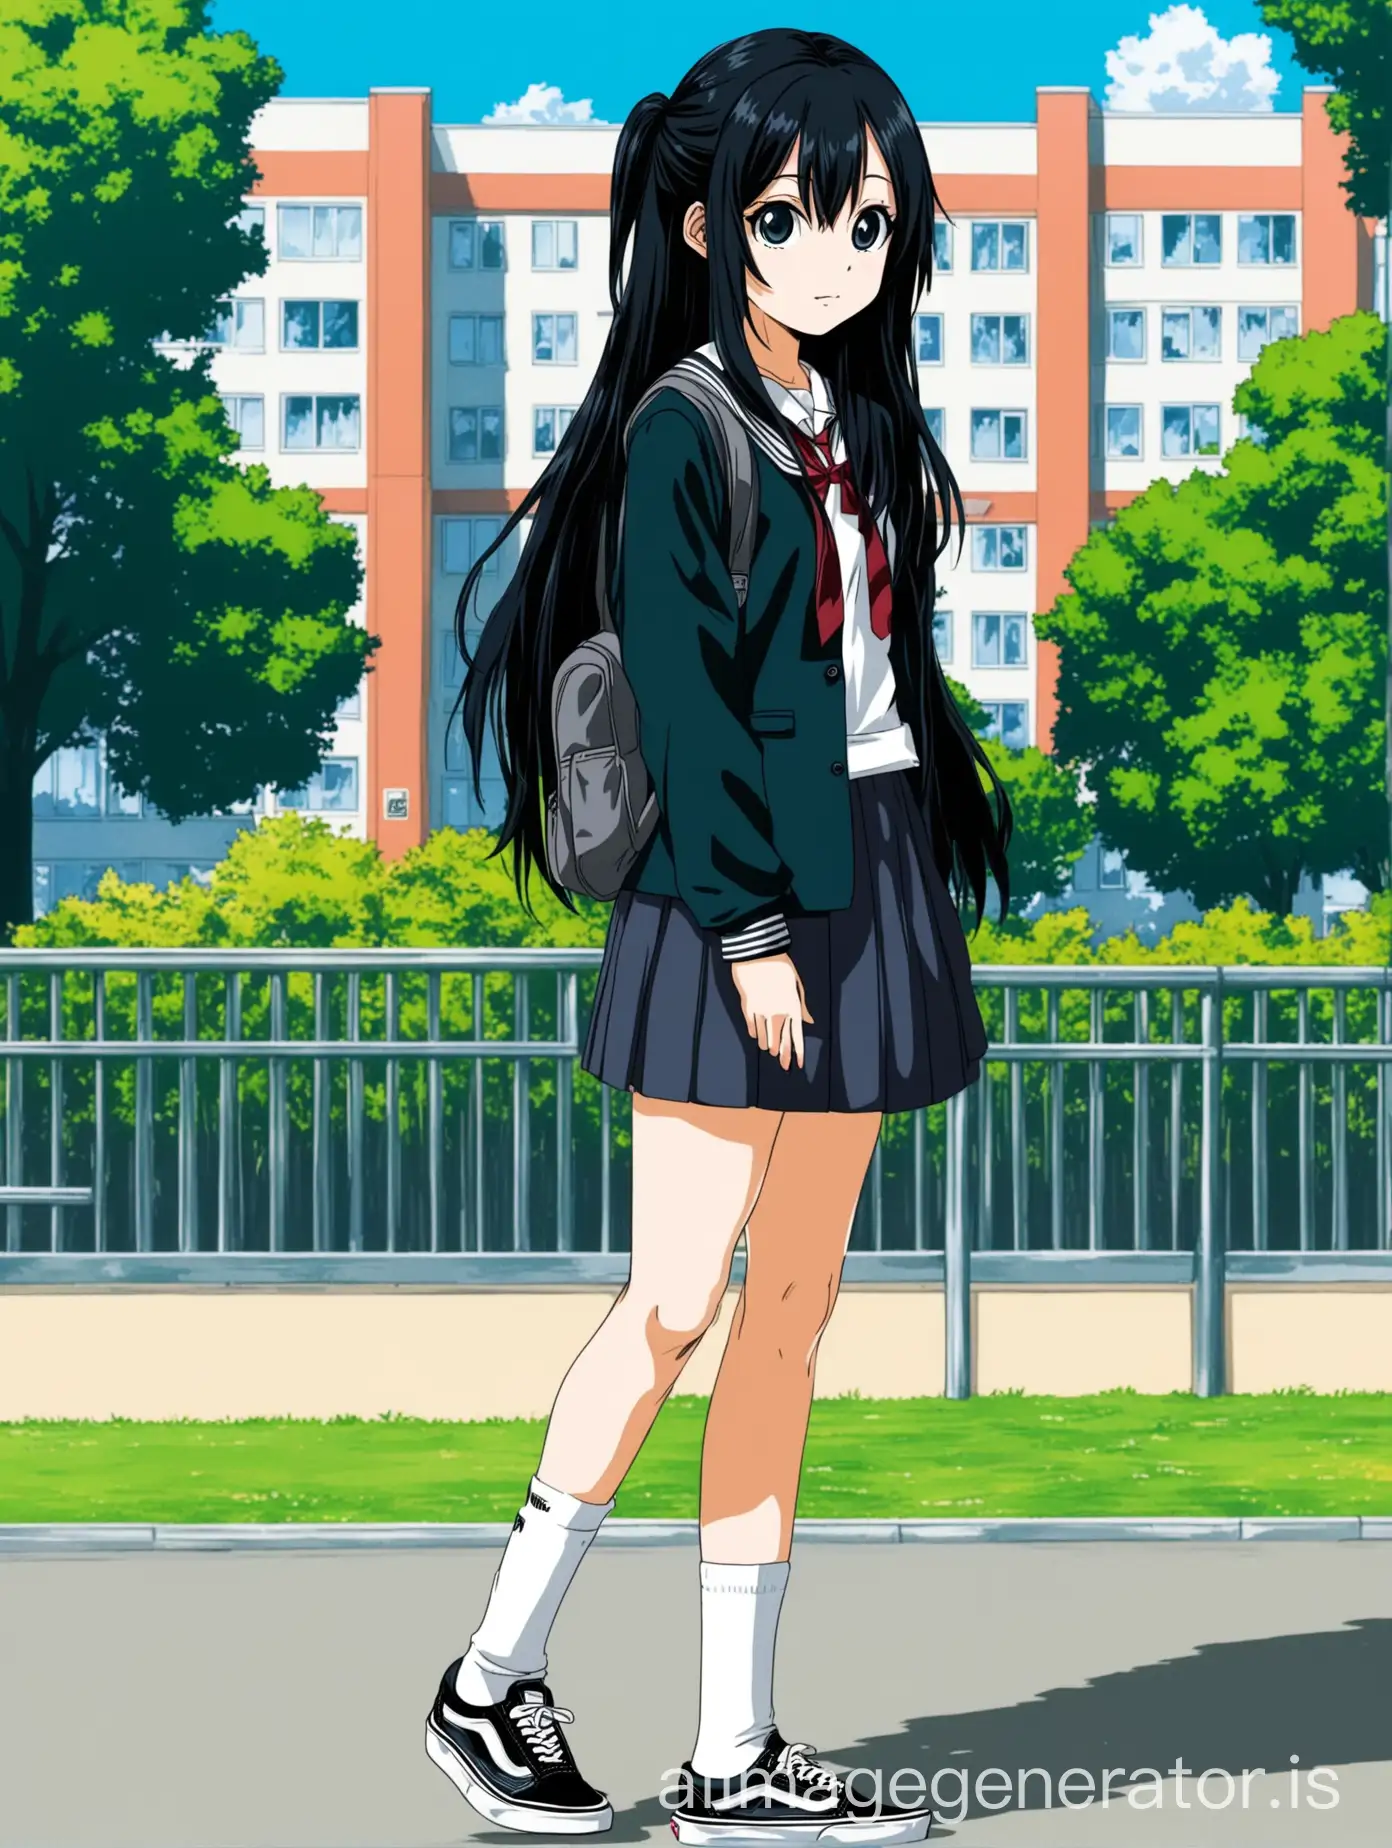 Anime-Girl-Standing-in-Park-with-School-Outfit-and-Long-Black-Hair